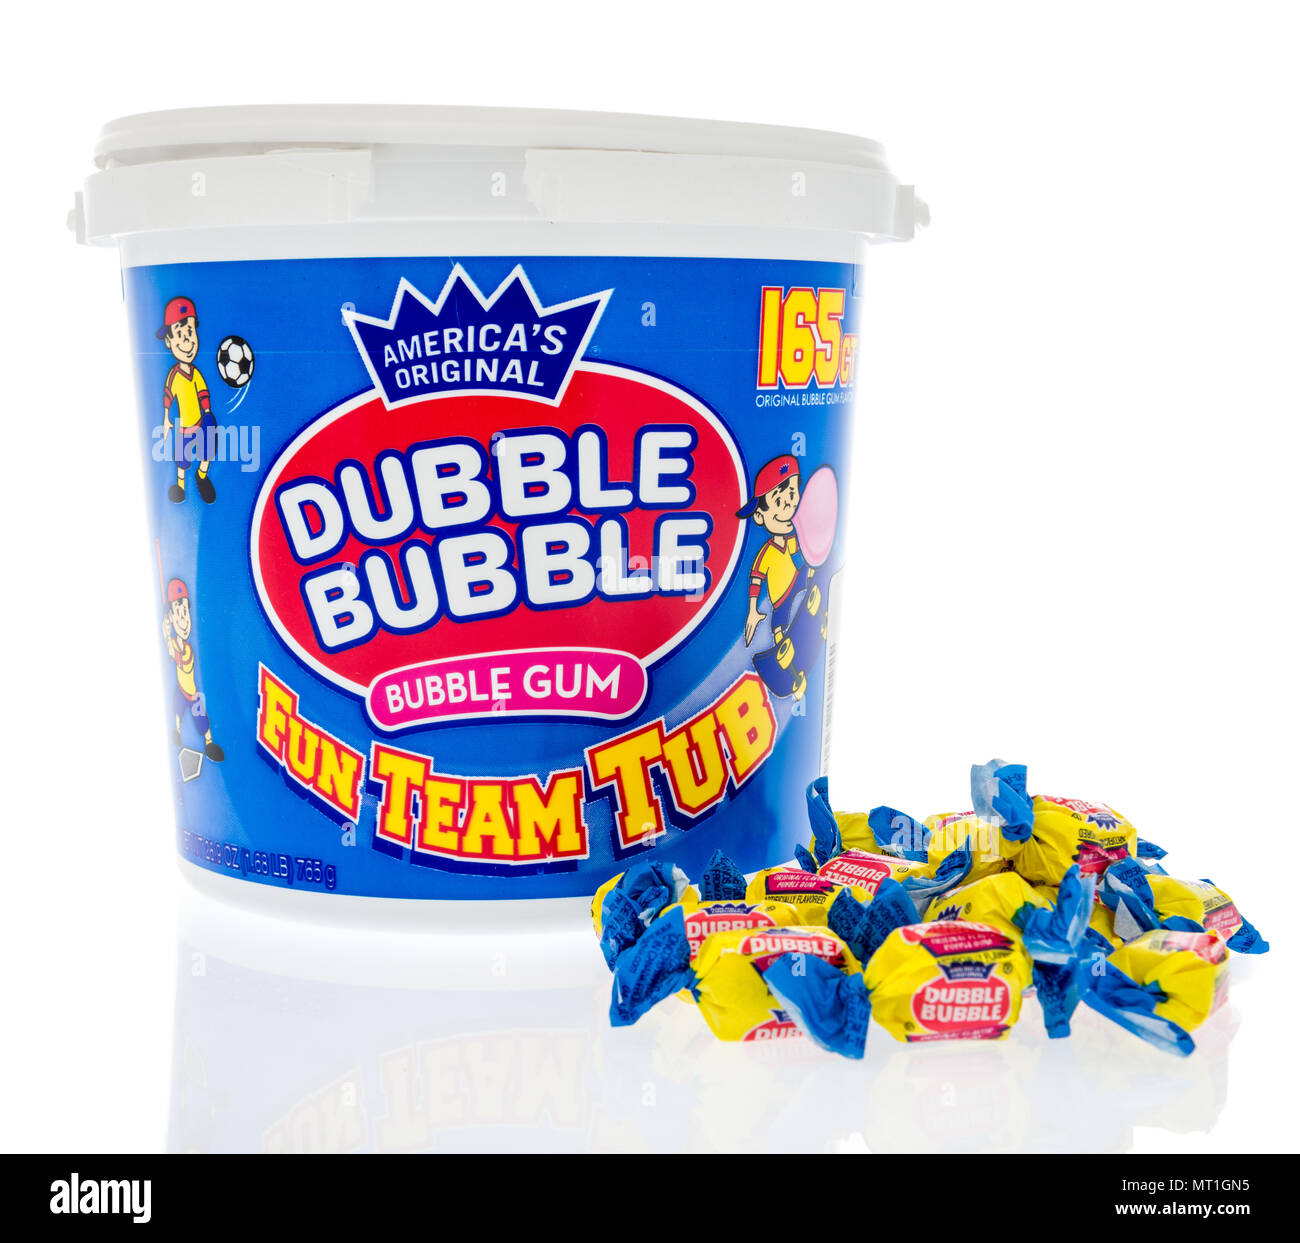 Winneconne - 2 May 2018: A tub of Dubble bubble fun team bubble gum on an isolated background. Stock Photo